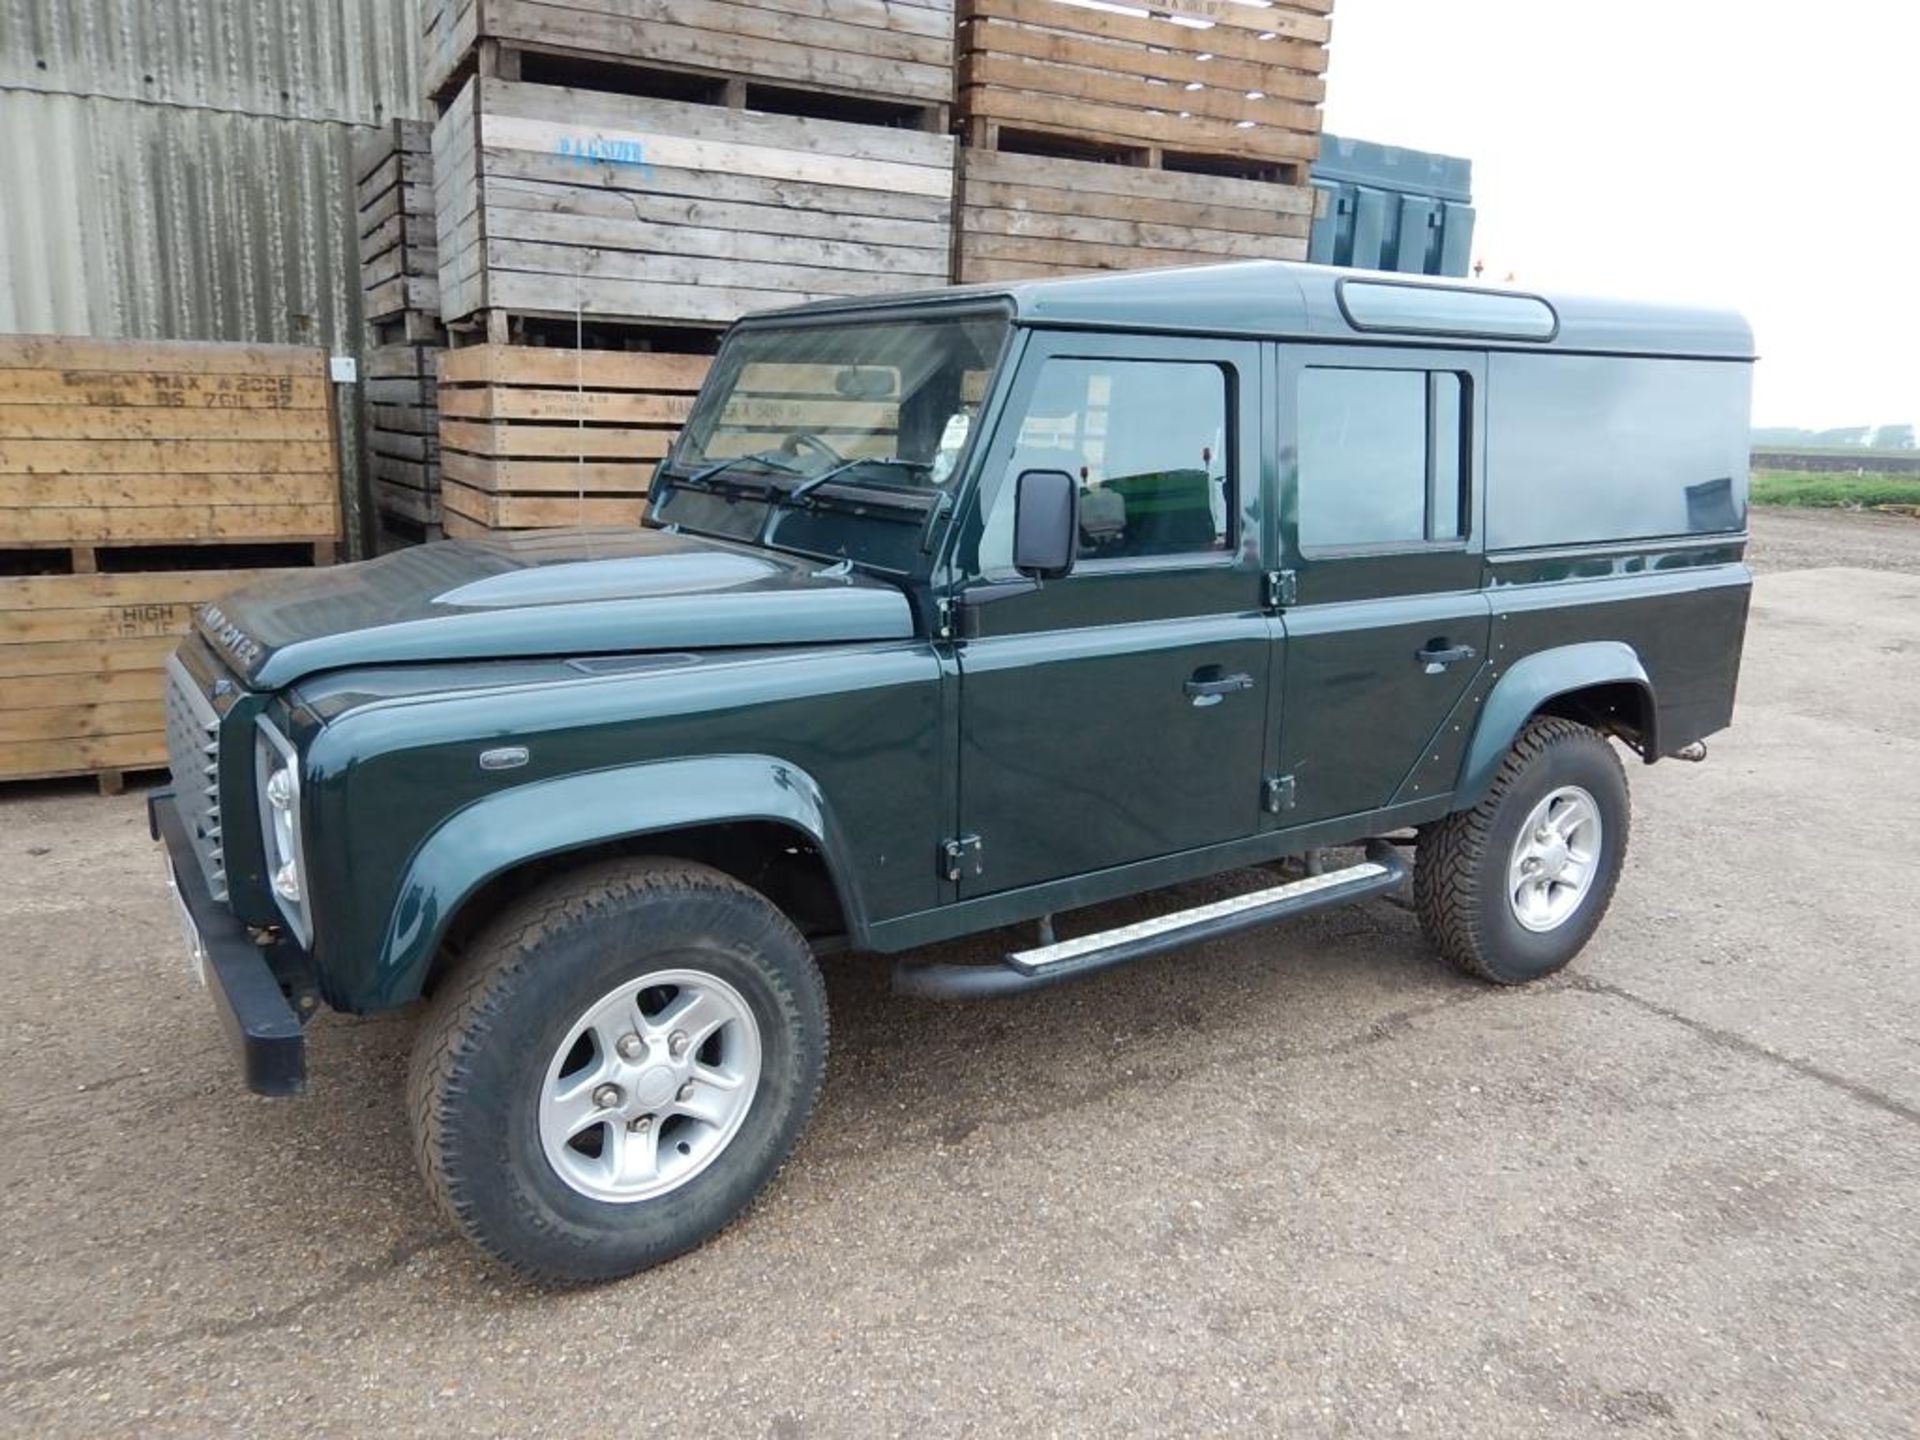 Land Rover Defender 110 XS 2.4L TDCi manual twin cab with half leather seats, air conditioning, - Image 6 of 8